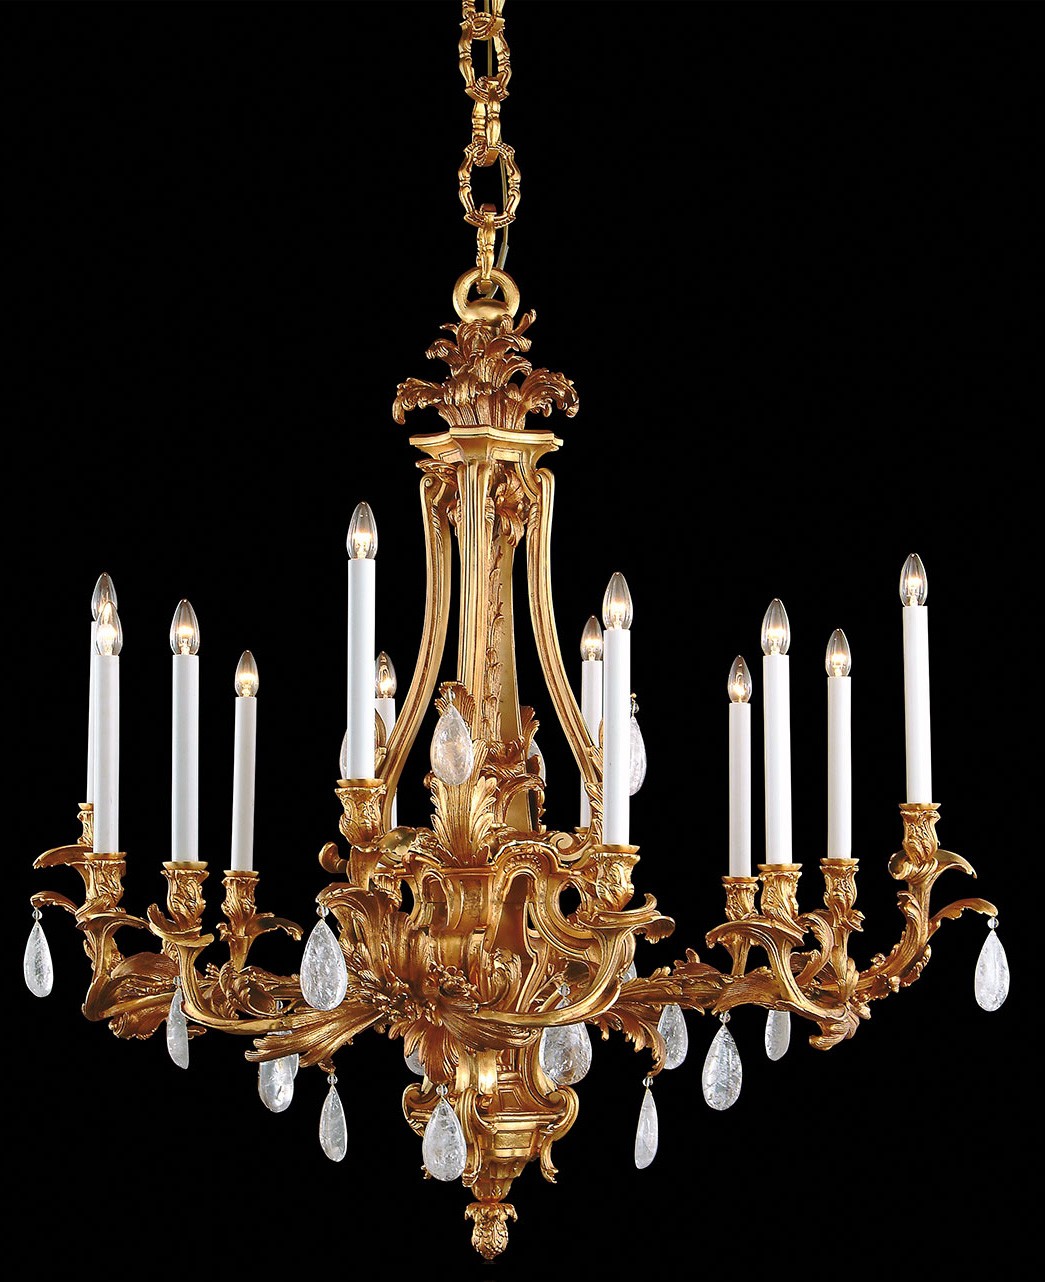 Chandeliers LARGE CHANDELIER. Padua Collection 29561